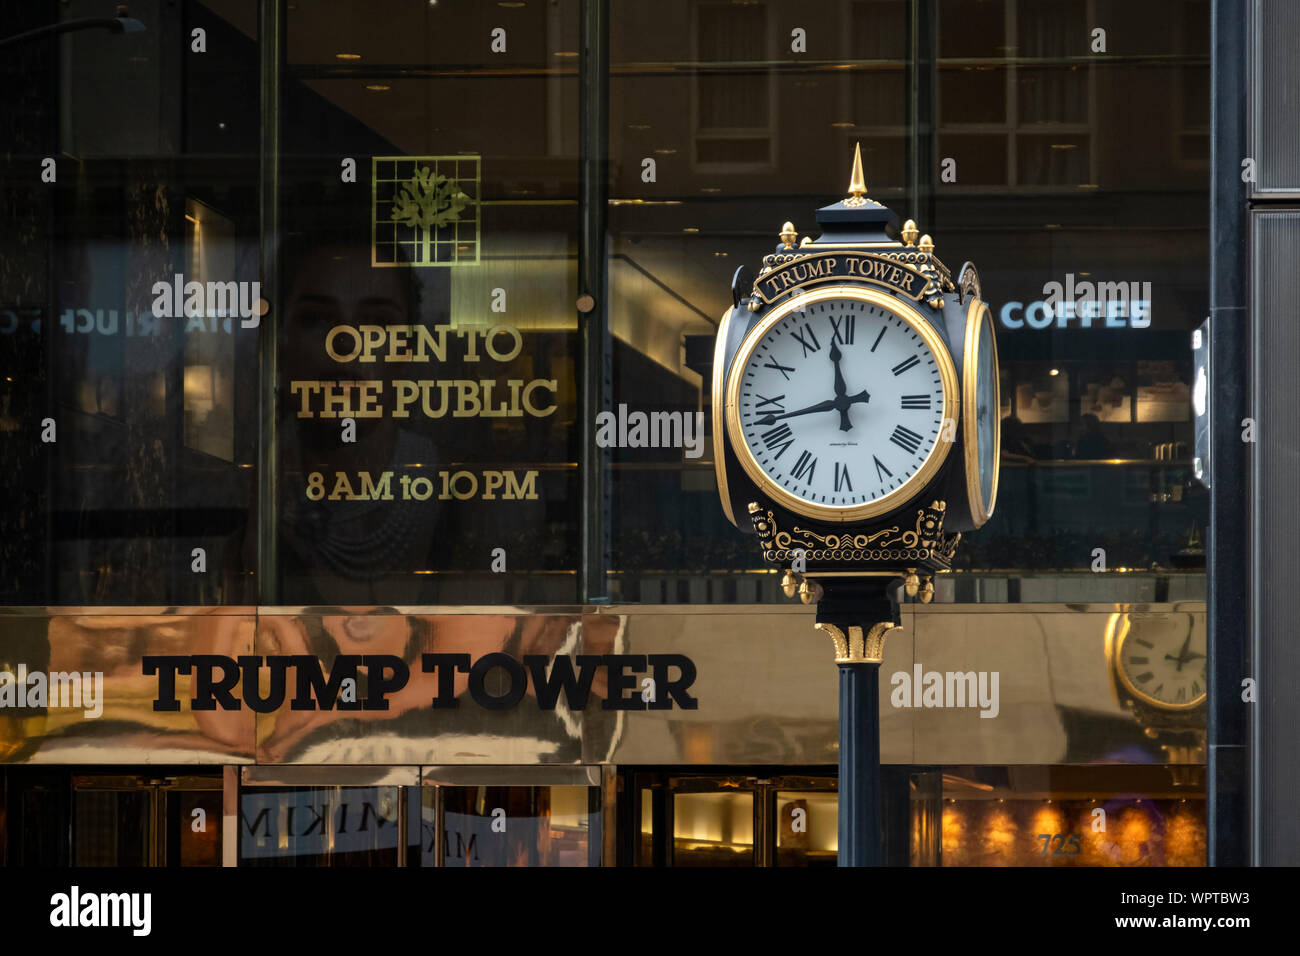 Trump Tower Clock and Entrance to Trump Towers, 5th Avenue, New York, USA Stock Photo